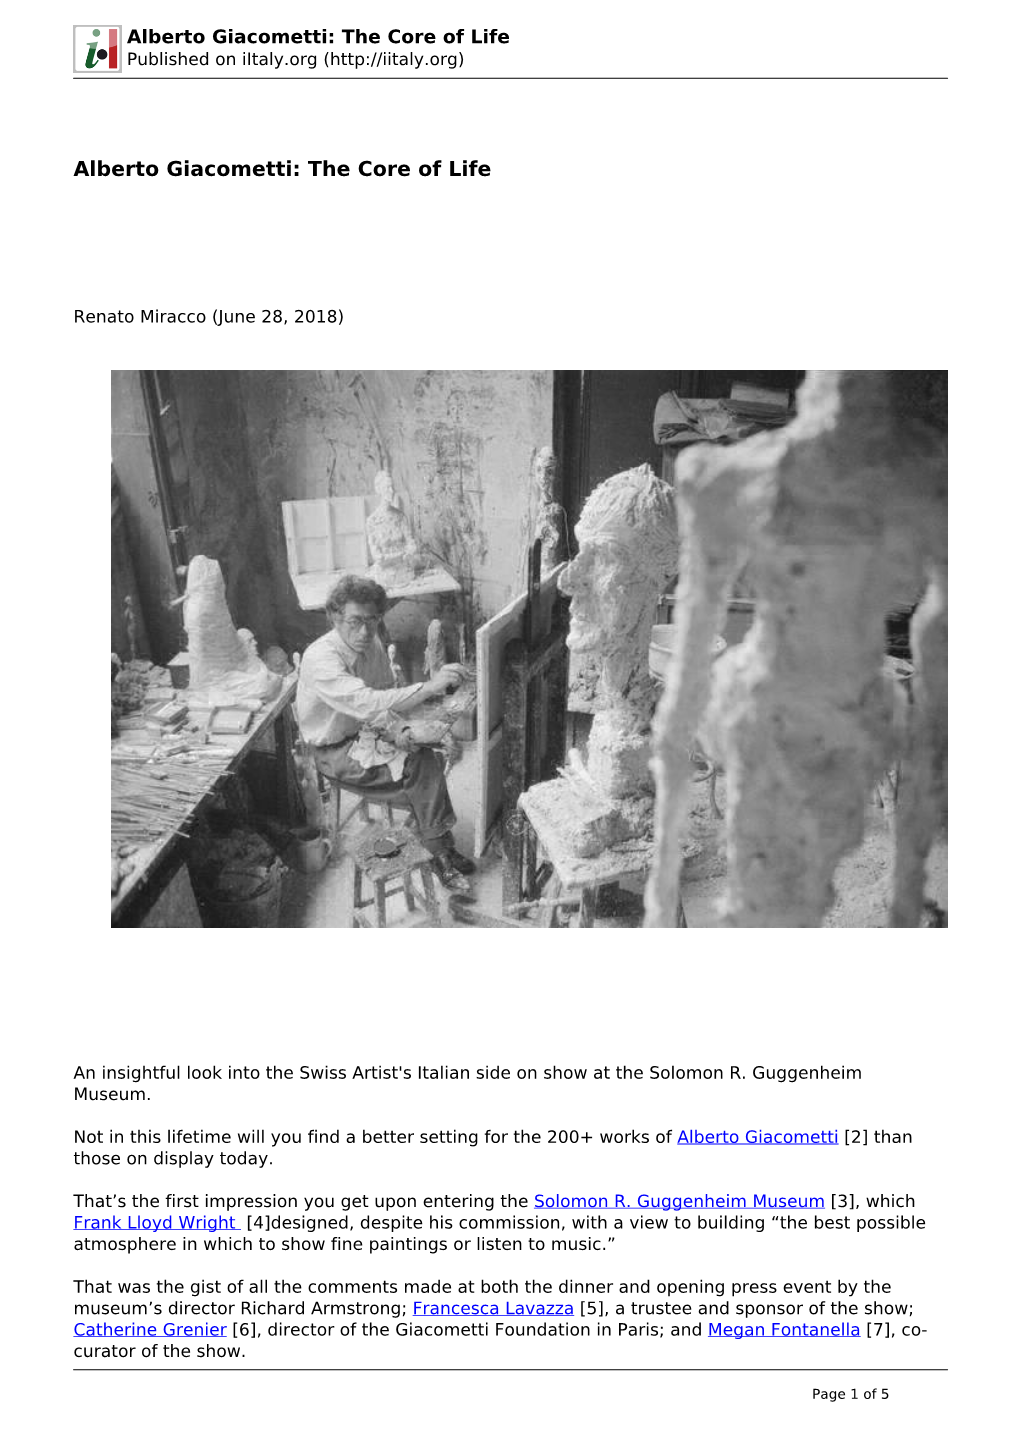 Alberto Giacometti: the Core of Life Published on Iitaly.Org (